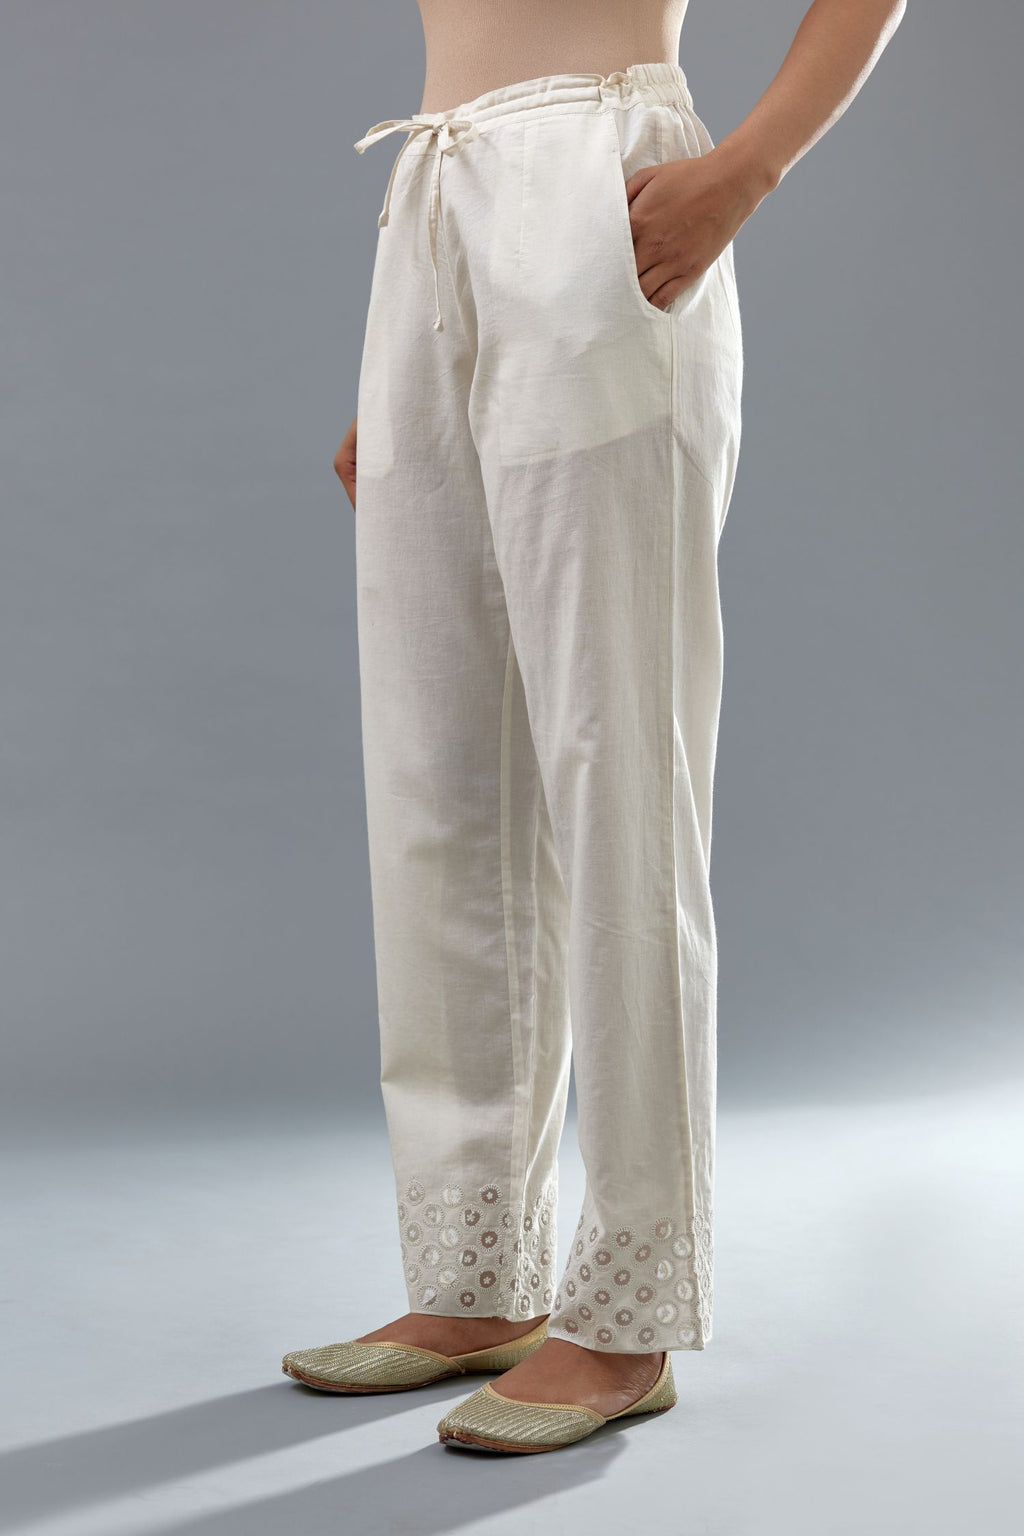 Off white cotton straight pants with appliqué and dori embroidery work at bottom hem.